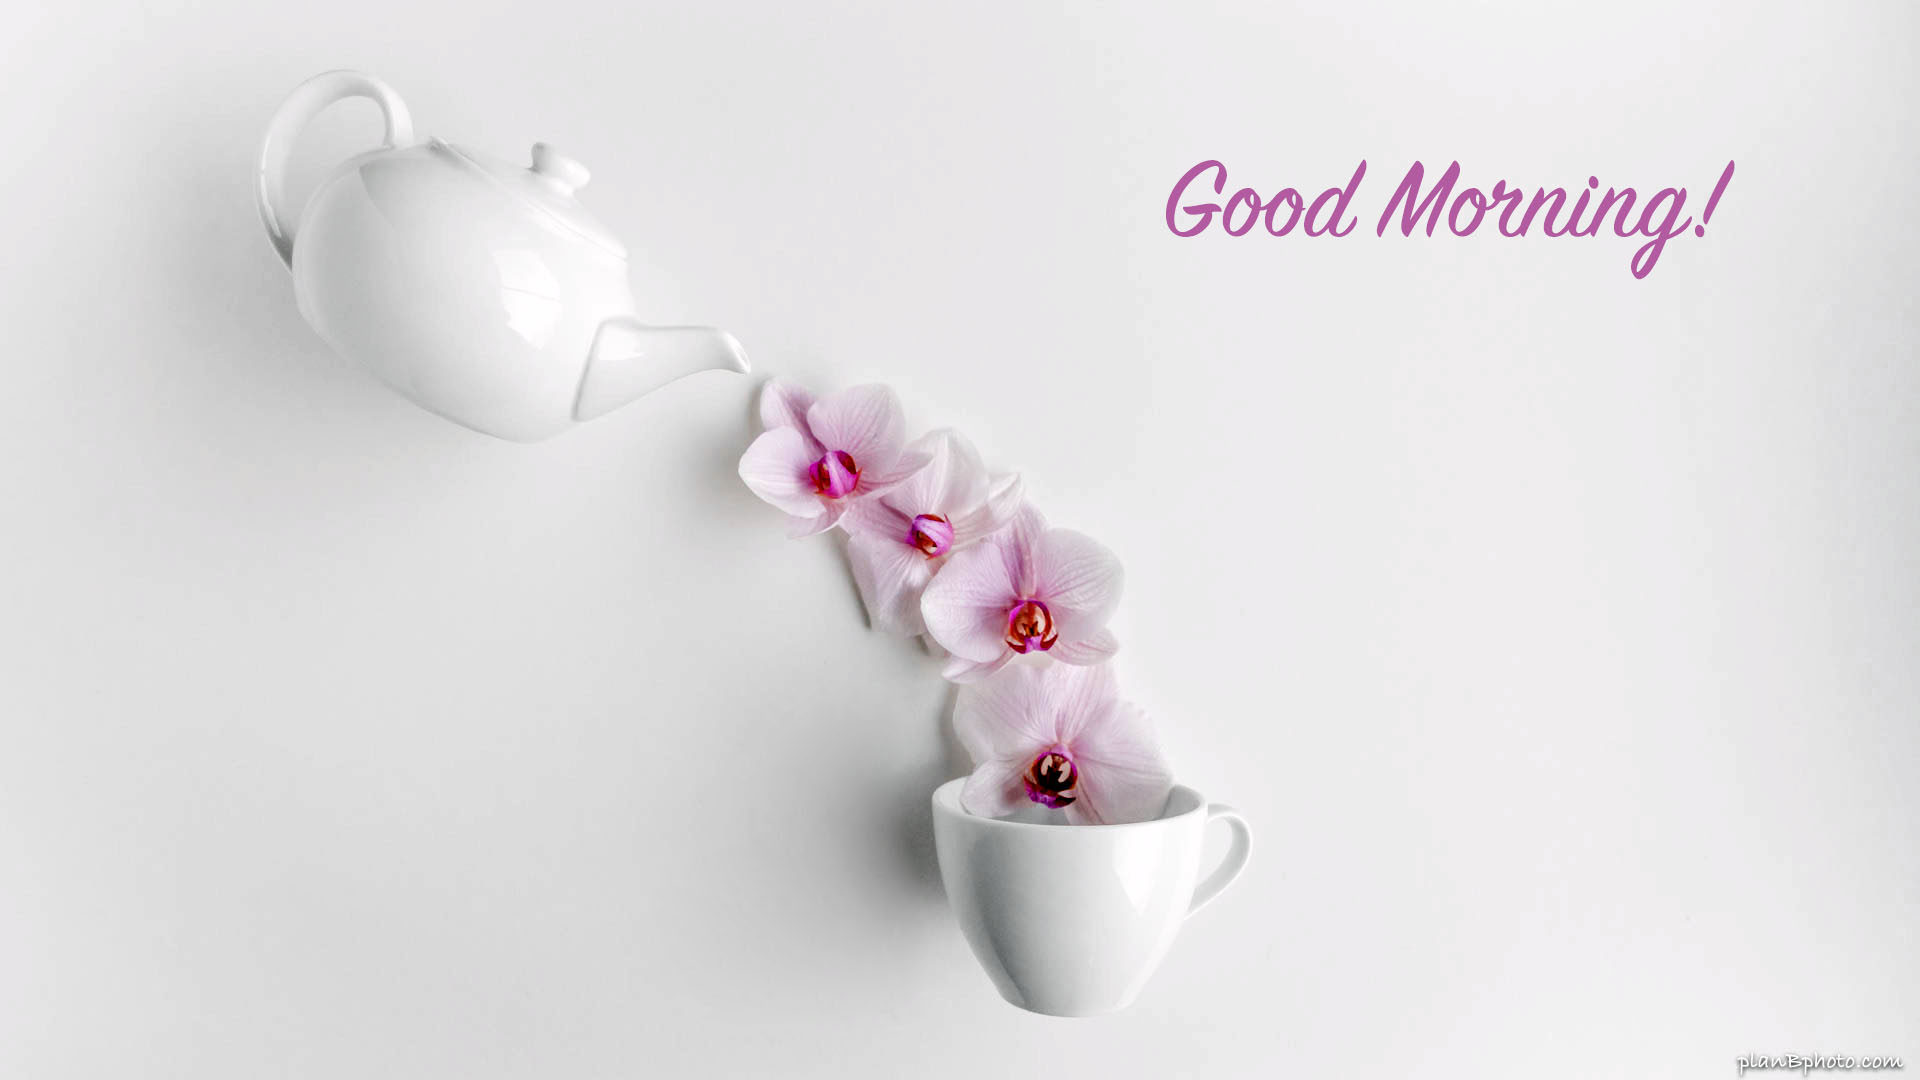 Good morning image on a white background with flowers and a teapot